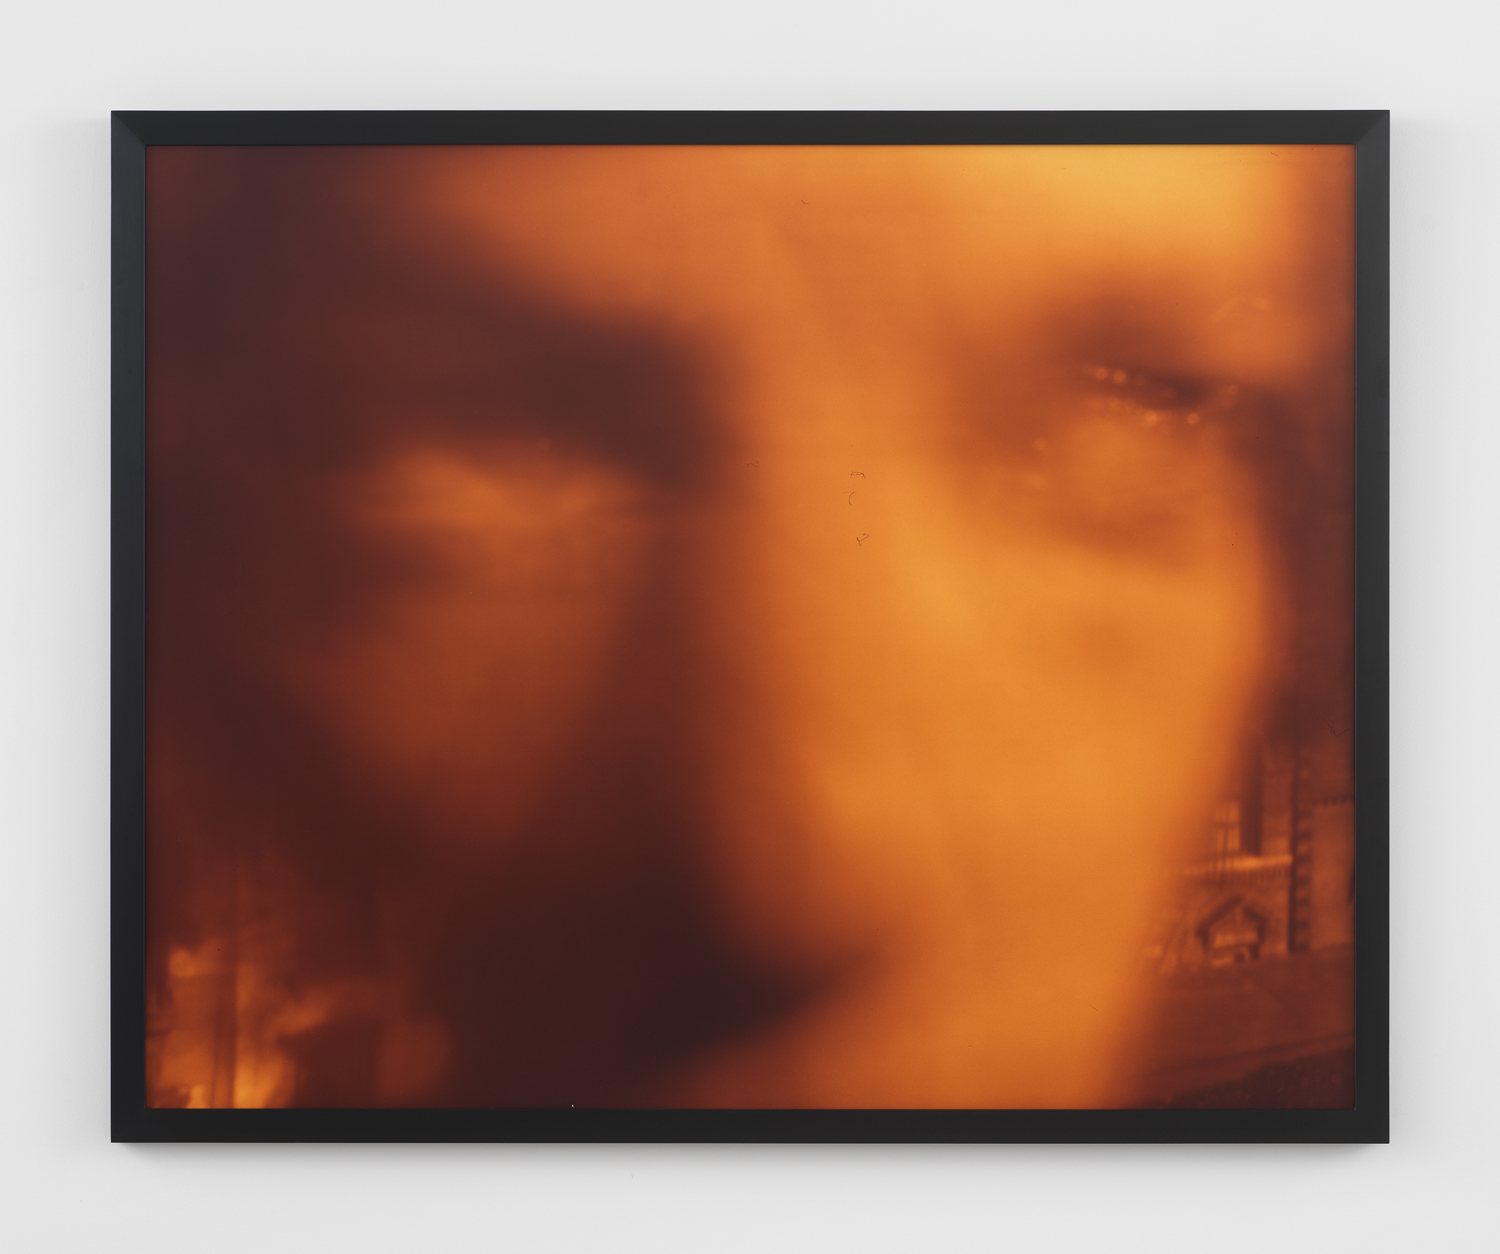 Barbara Ess, Head, 1991, C-print photograph mounted on board and laminated, 52 1/2h x 65 1/8w in.